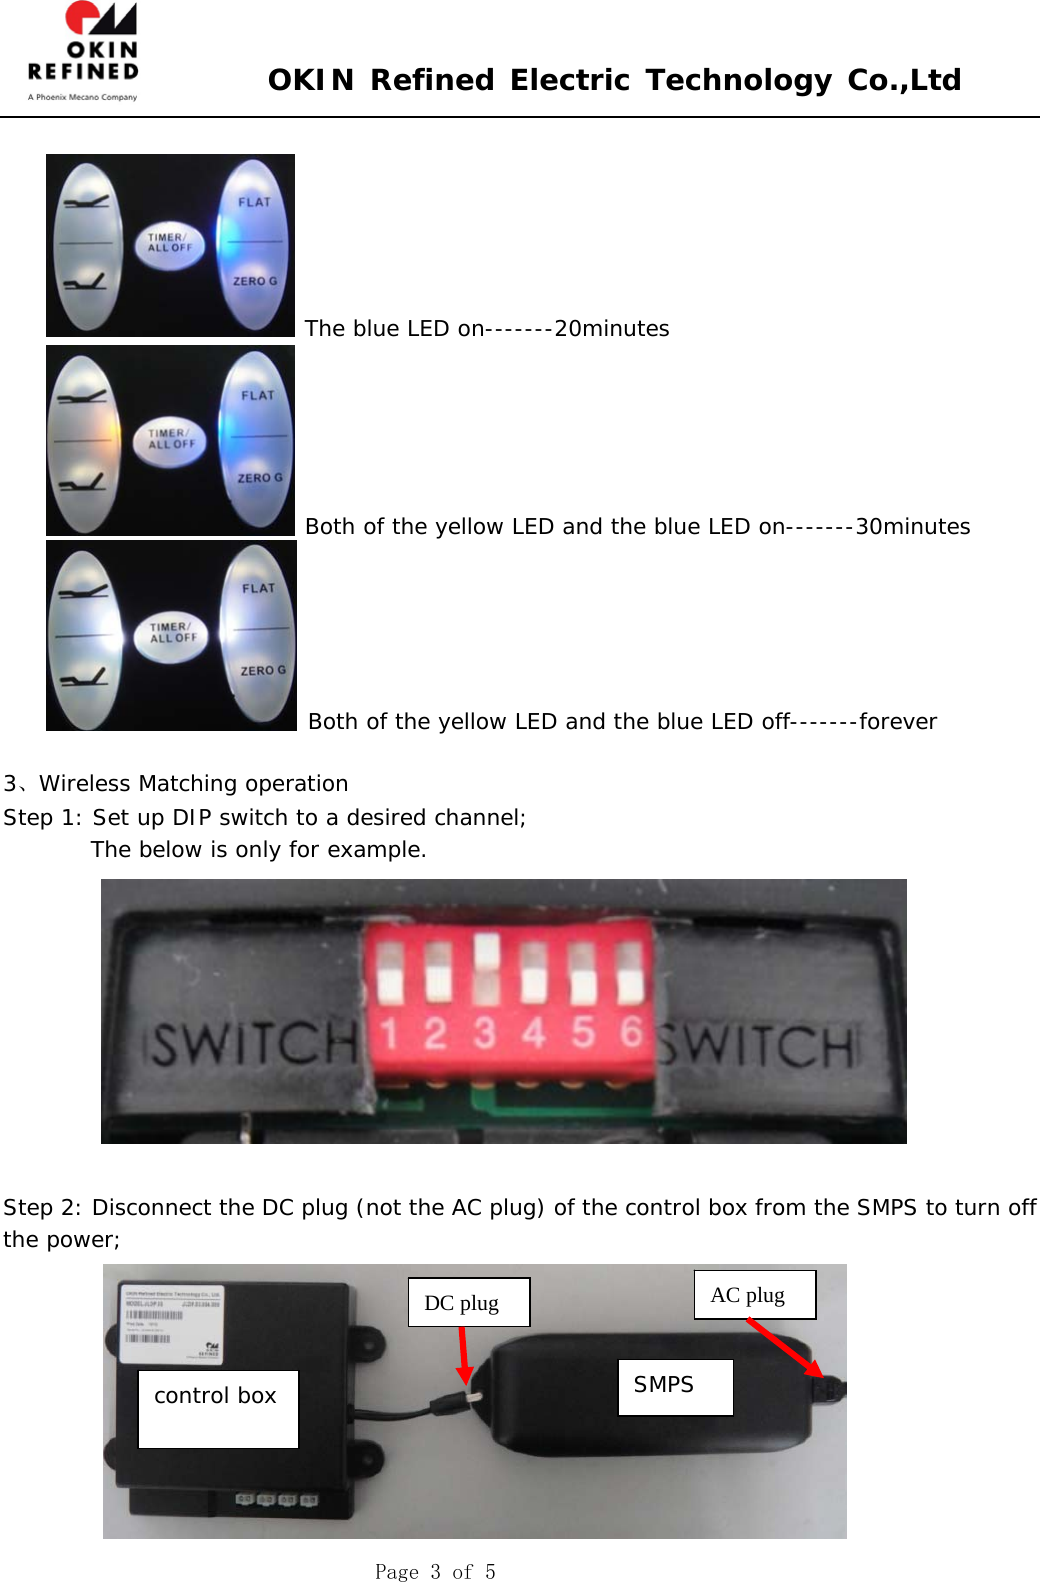  OKIN Refined Electric Technology Co.,Ltd    Page 3 of 5   The blue LED on-------20minutes  Both of the yellow LED and the blue LED on-------30minutes  Both of the yellow LED and the blue LED off-------forever  3、Wireless Matching operation Step 1: Set up DIP switch to a desired channel;         The below is only for example.             Step 2: Disconnect the DC plug (not the AC plug) of the control box from the SMPS to turn off the power;  DC plug control box SMPS AC plug 